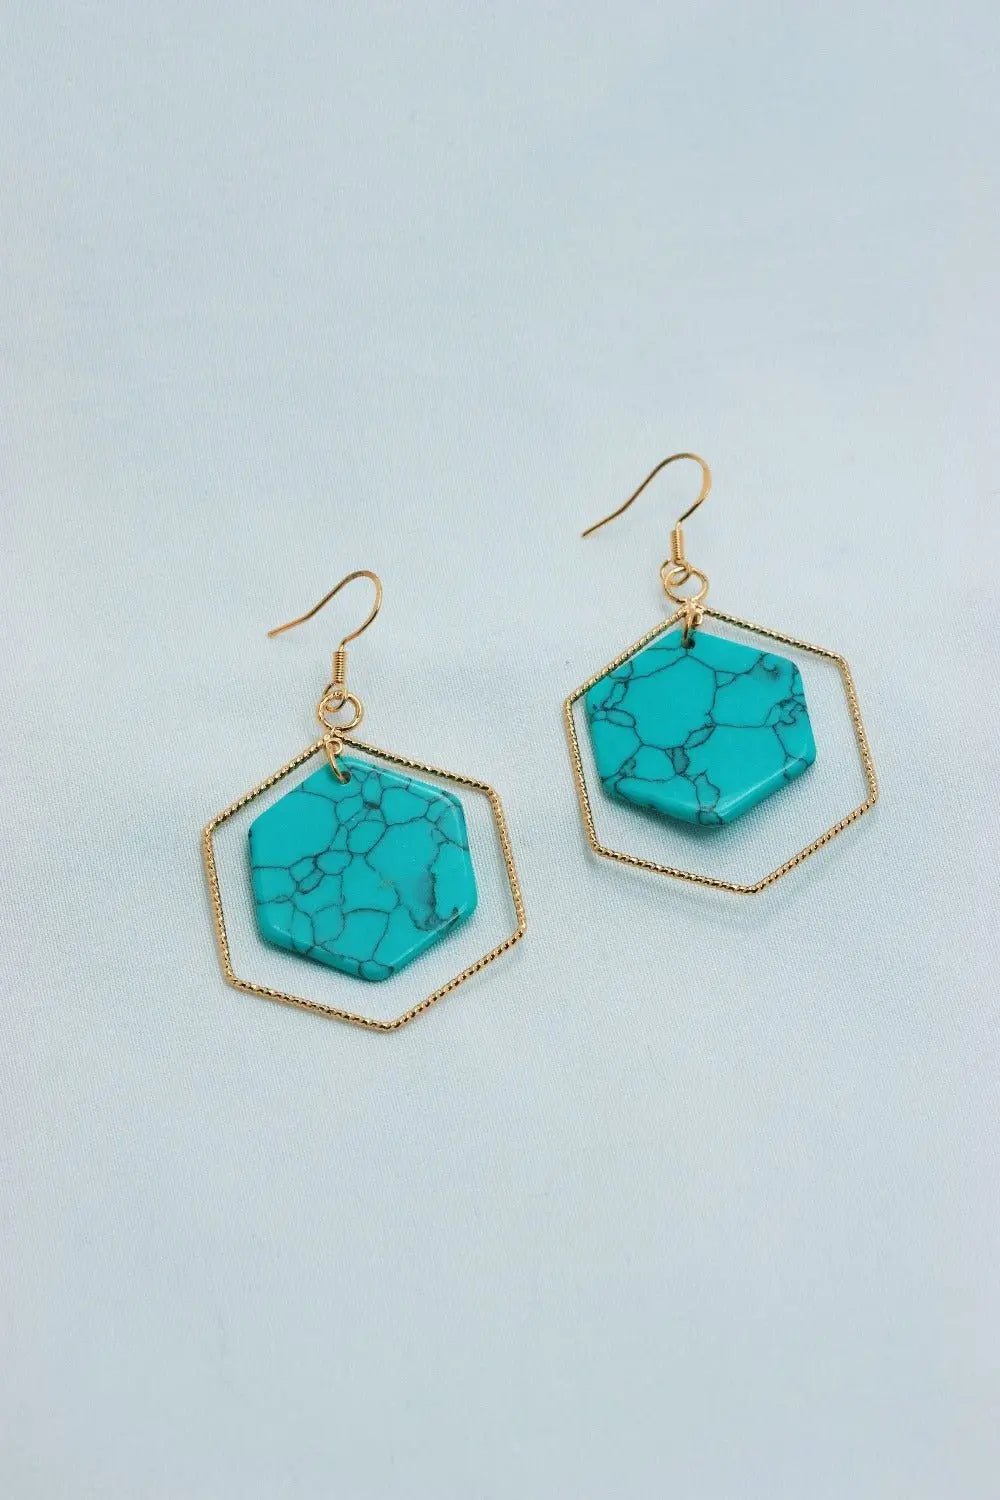 Turquoise & Gold Drop Earrings - Lucy Doo